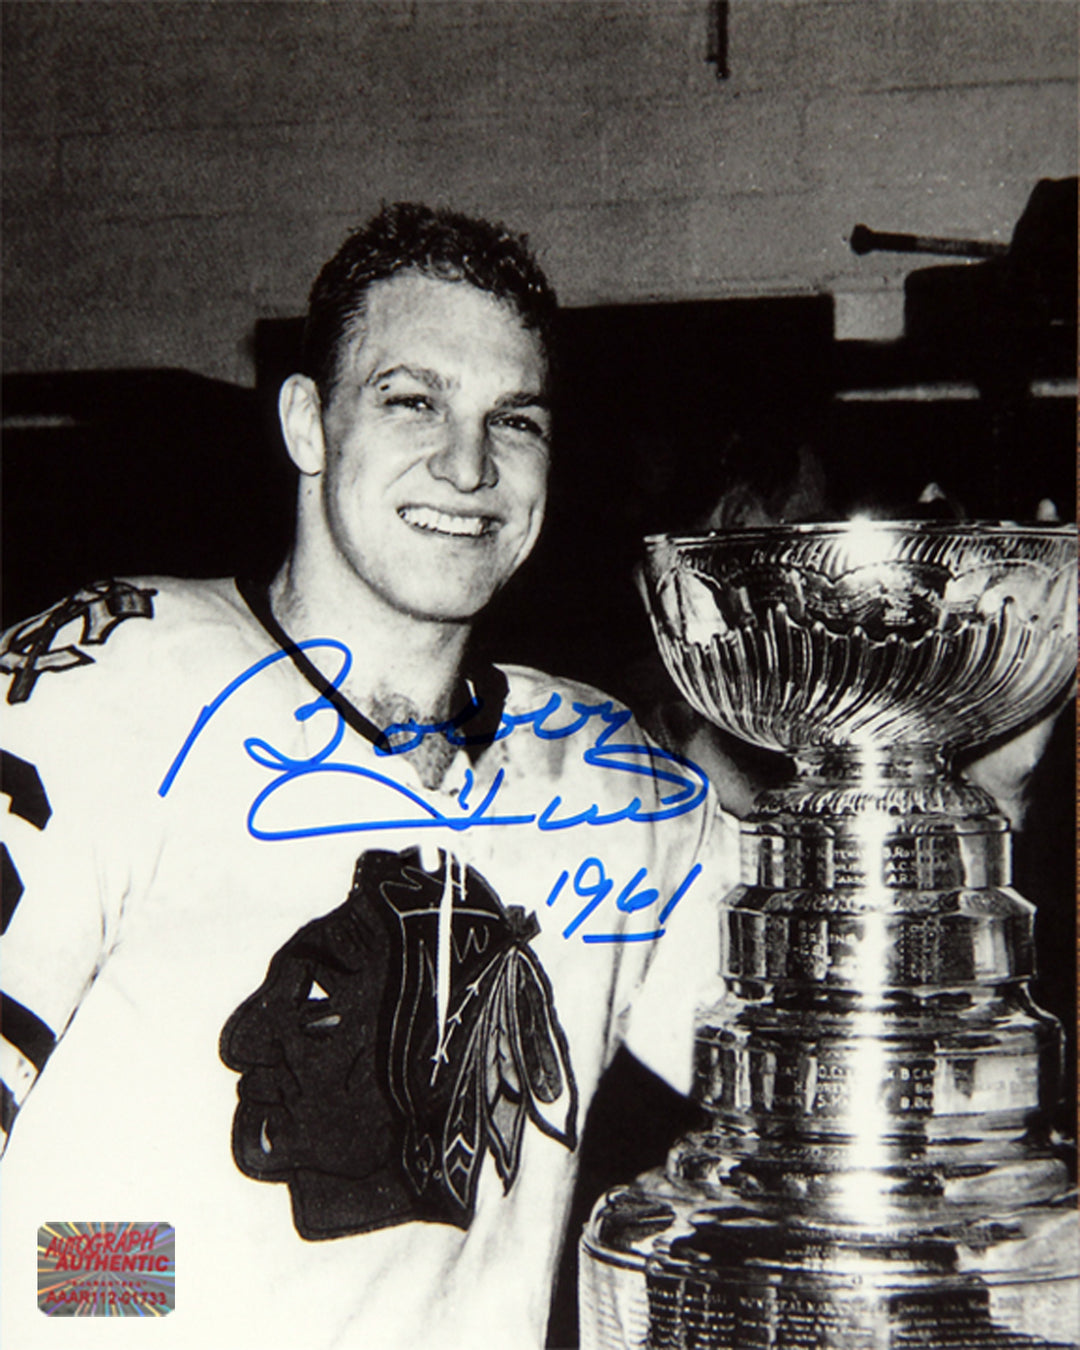 Bobby Hull Autographed 8X10 Photograph (Stanley Cup) Chicago Blackhawks, Chicago Blackhawks, NHL, Hockey, Autographed, Signed, AAHPH30245